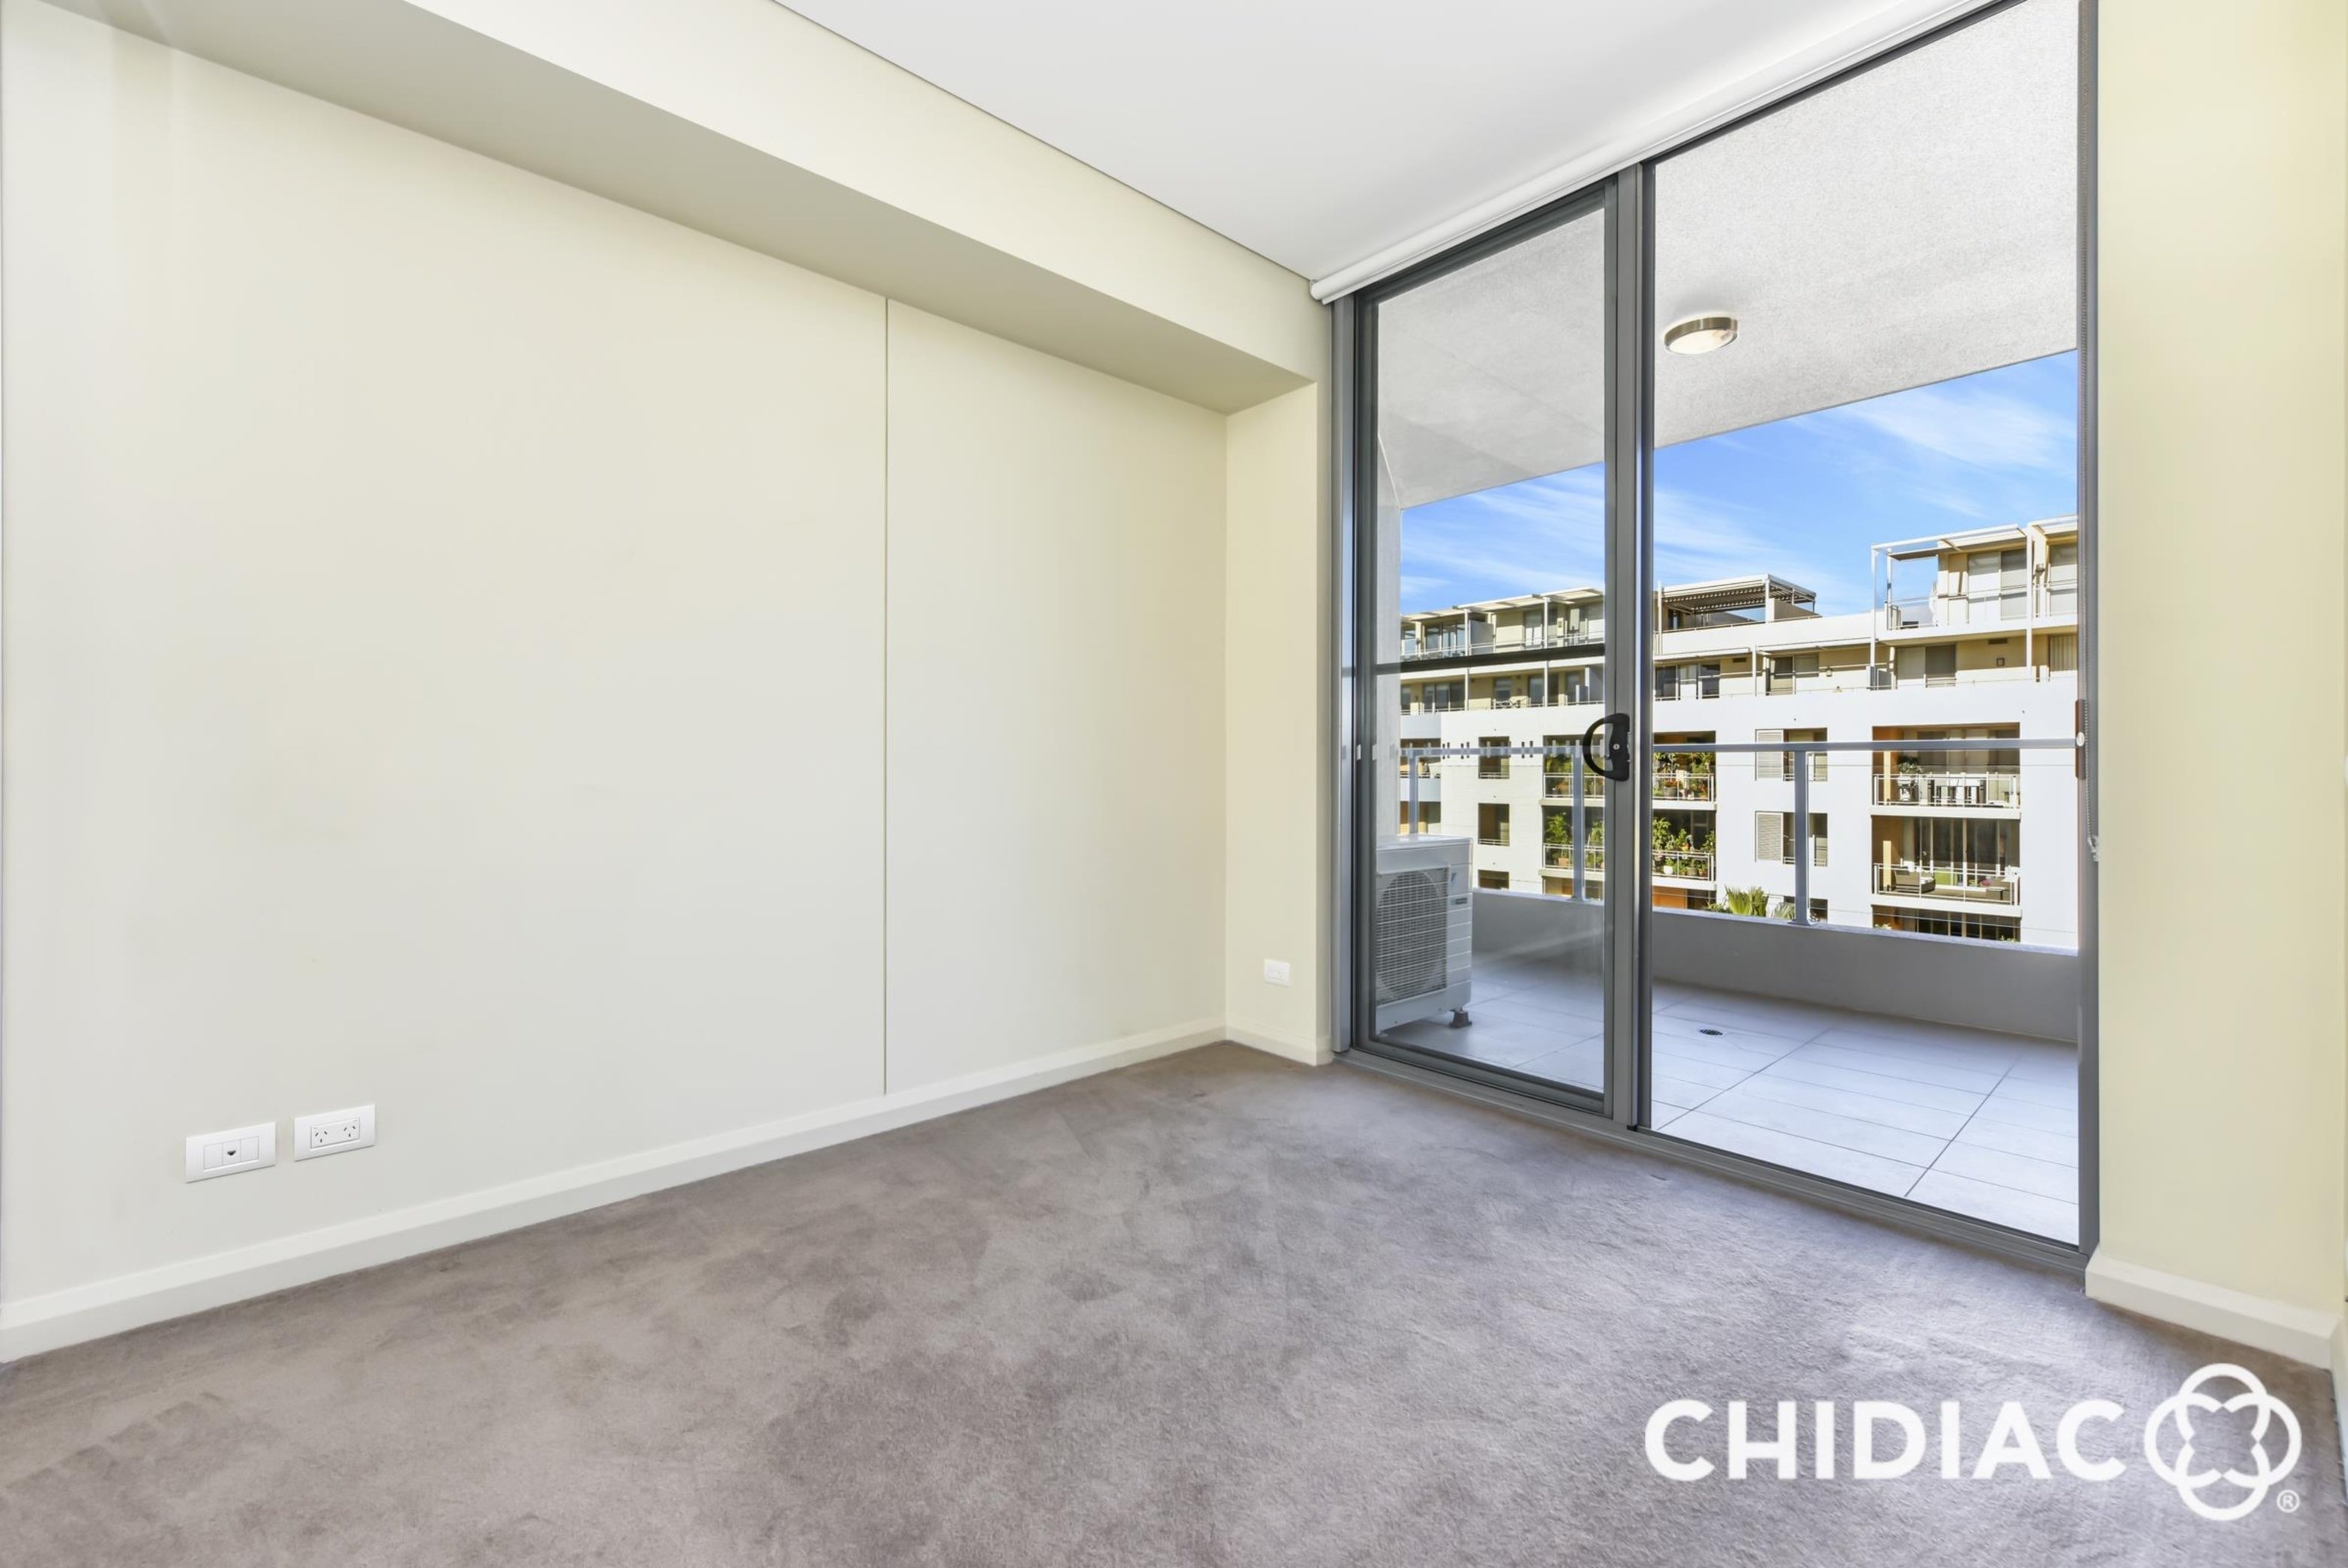 602/7 Stromboli Strait, Wentworth Point Leased by Chidiac Realty - image 3